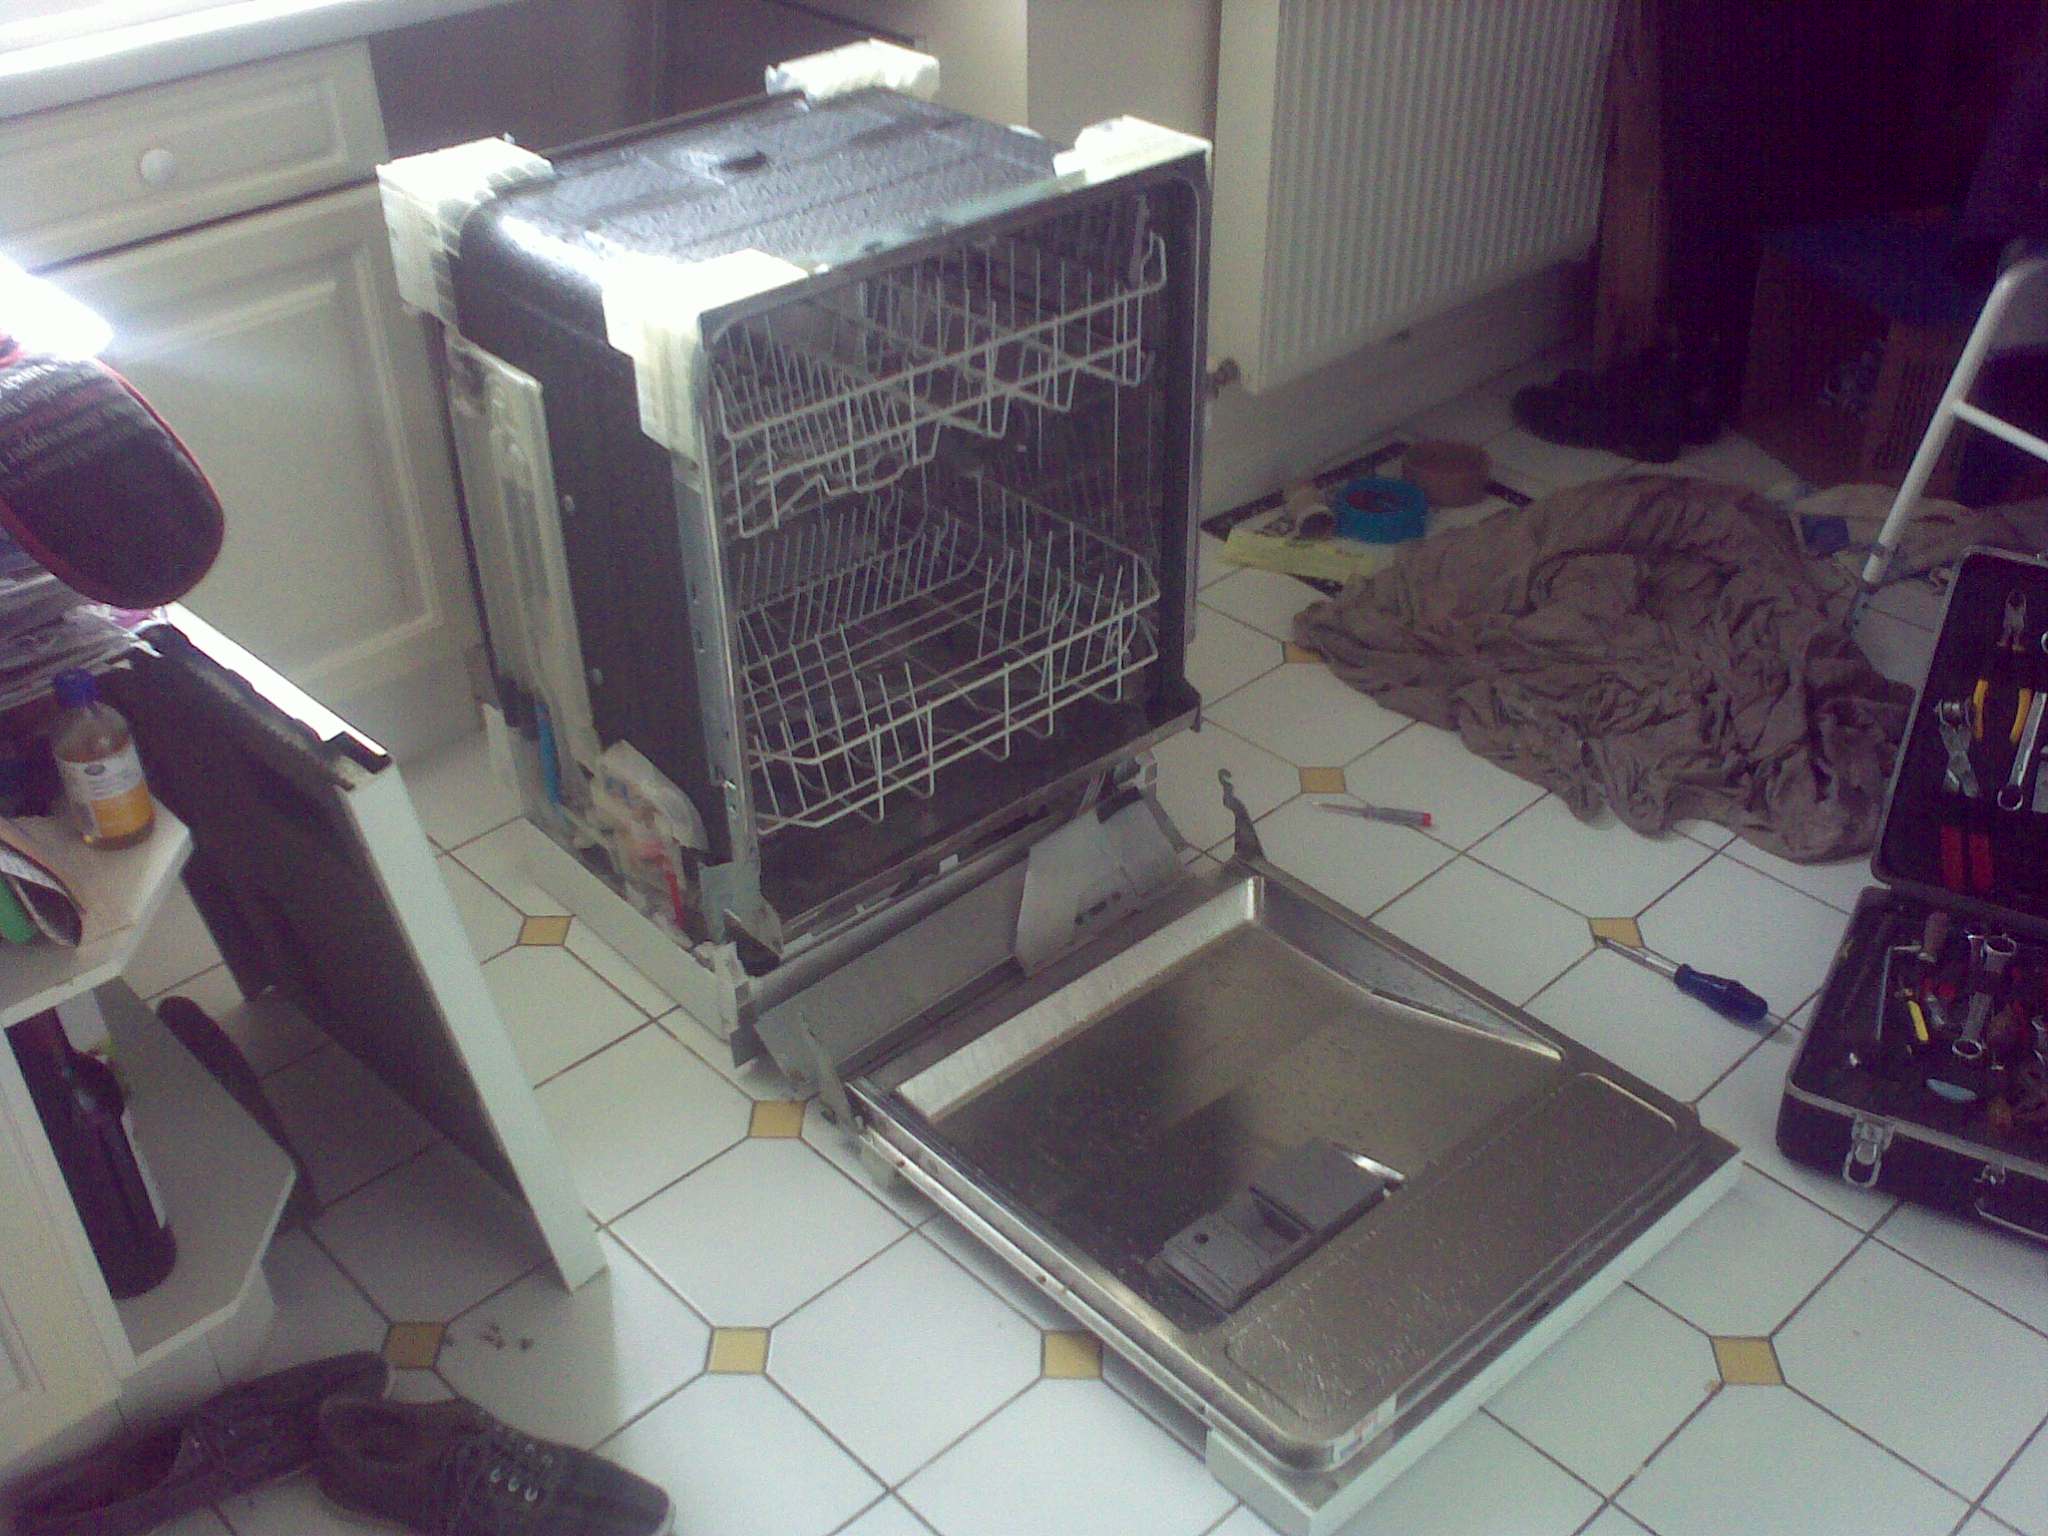 BOSCH DISHWASHER WITH TOP DOOR AND PANELS REMOVED